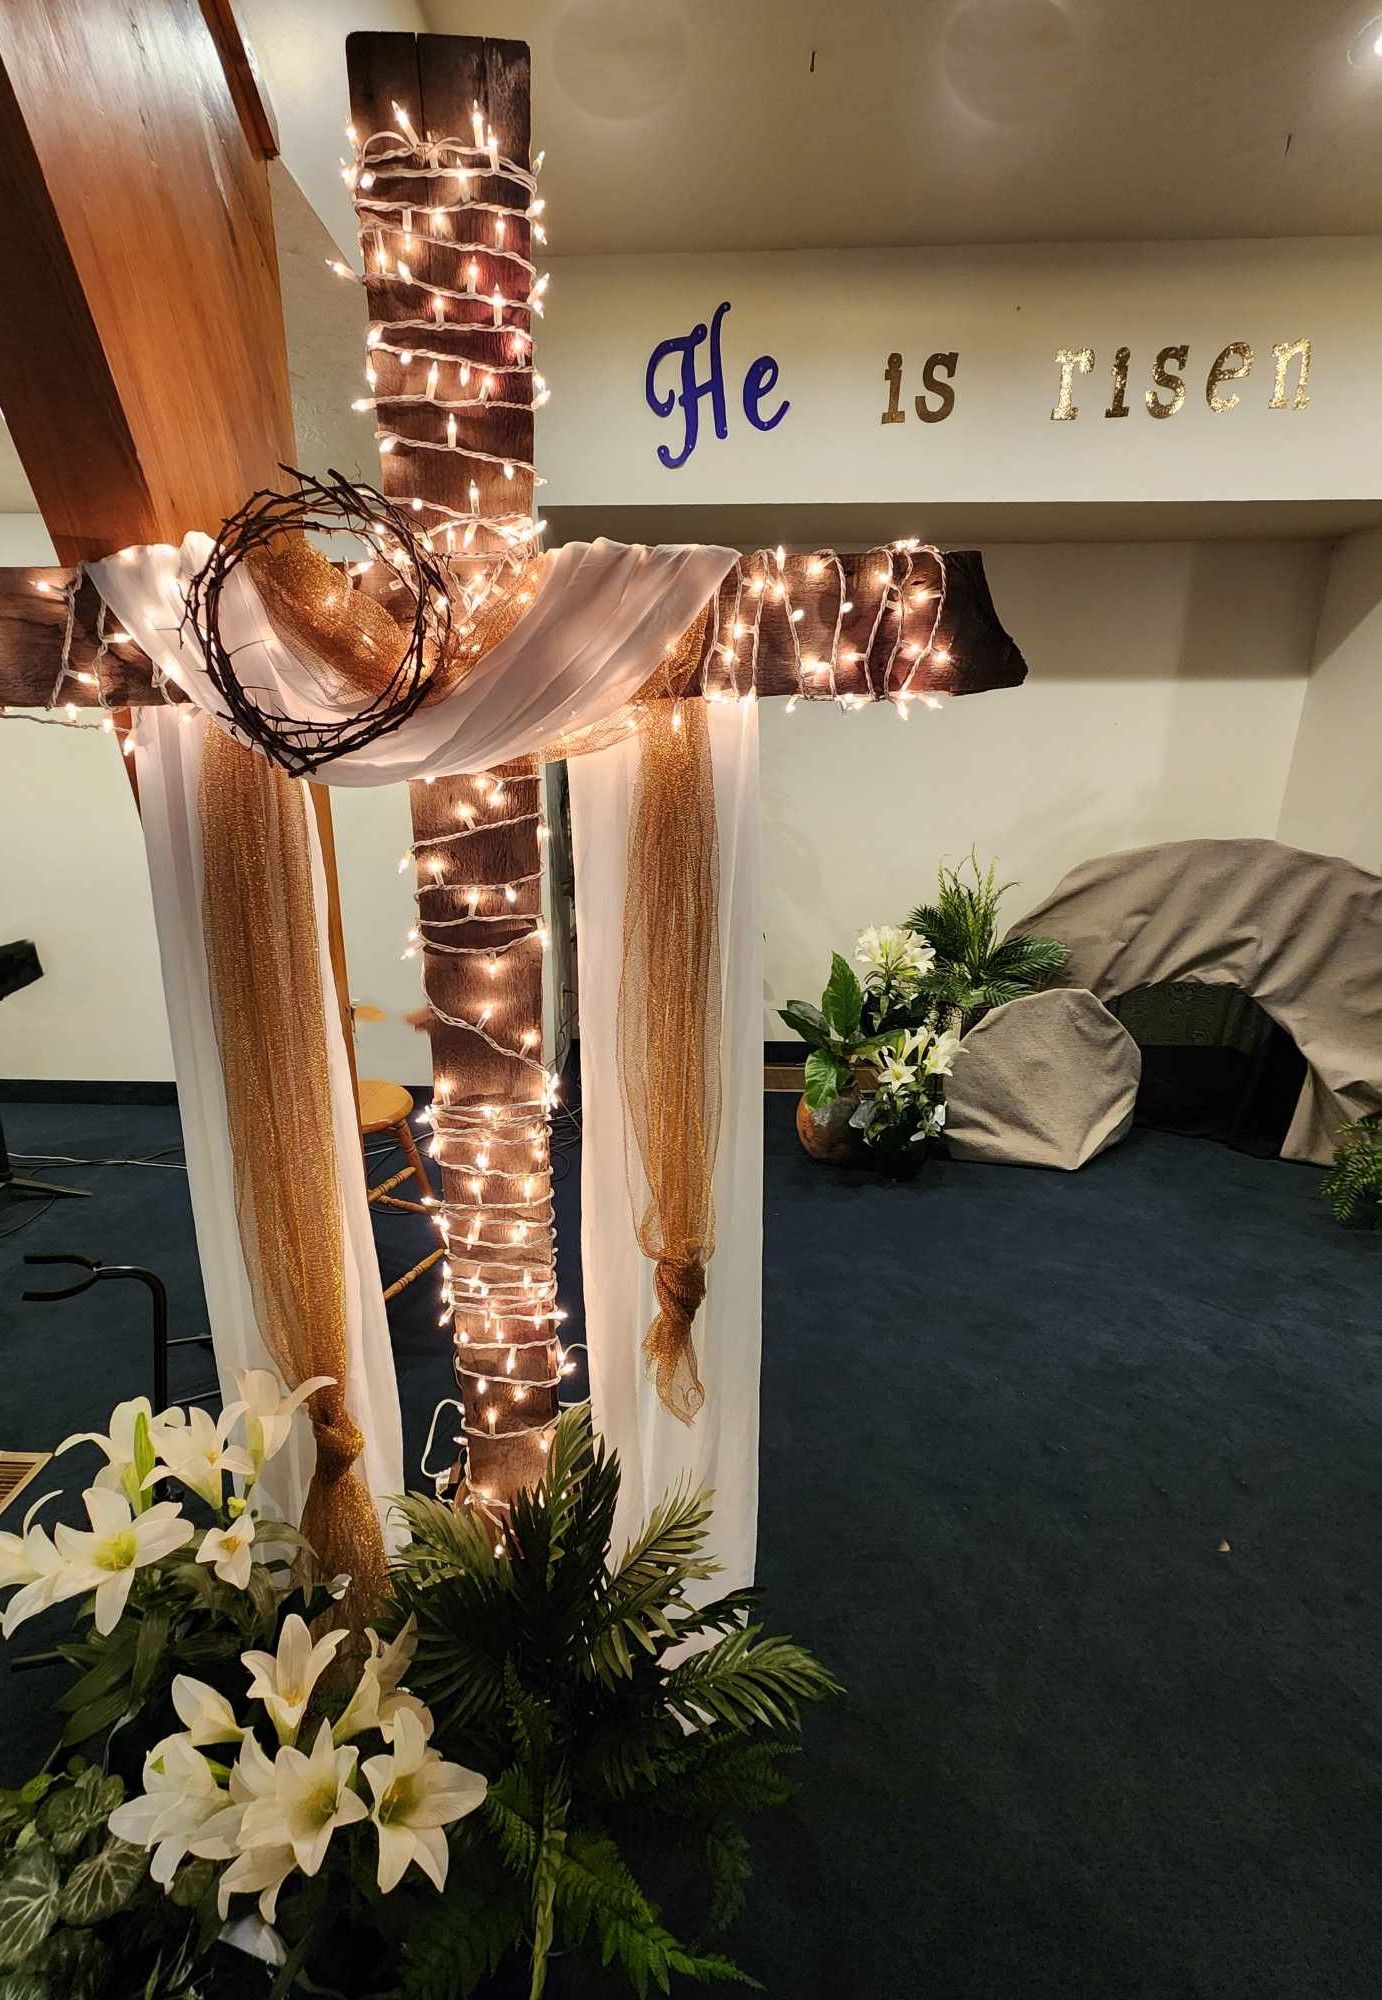 A cross decorated with lights and flowers in a room with the words he is risen on the wall.